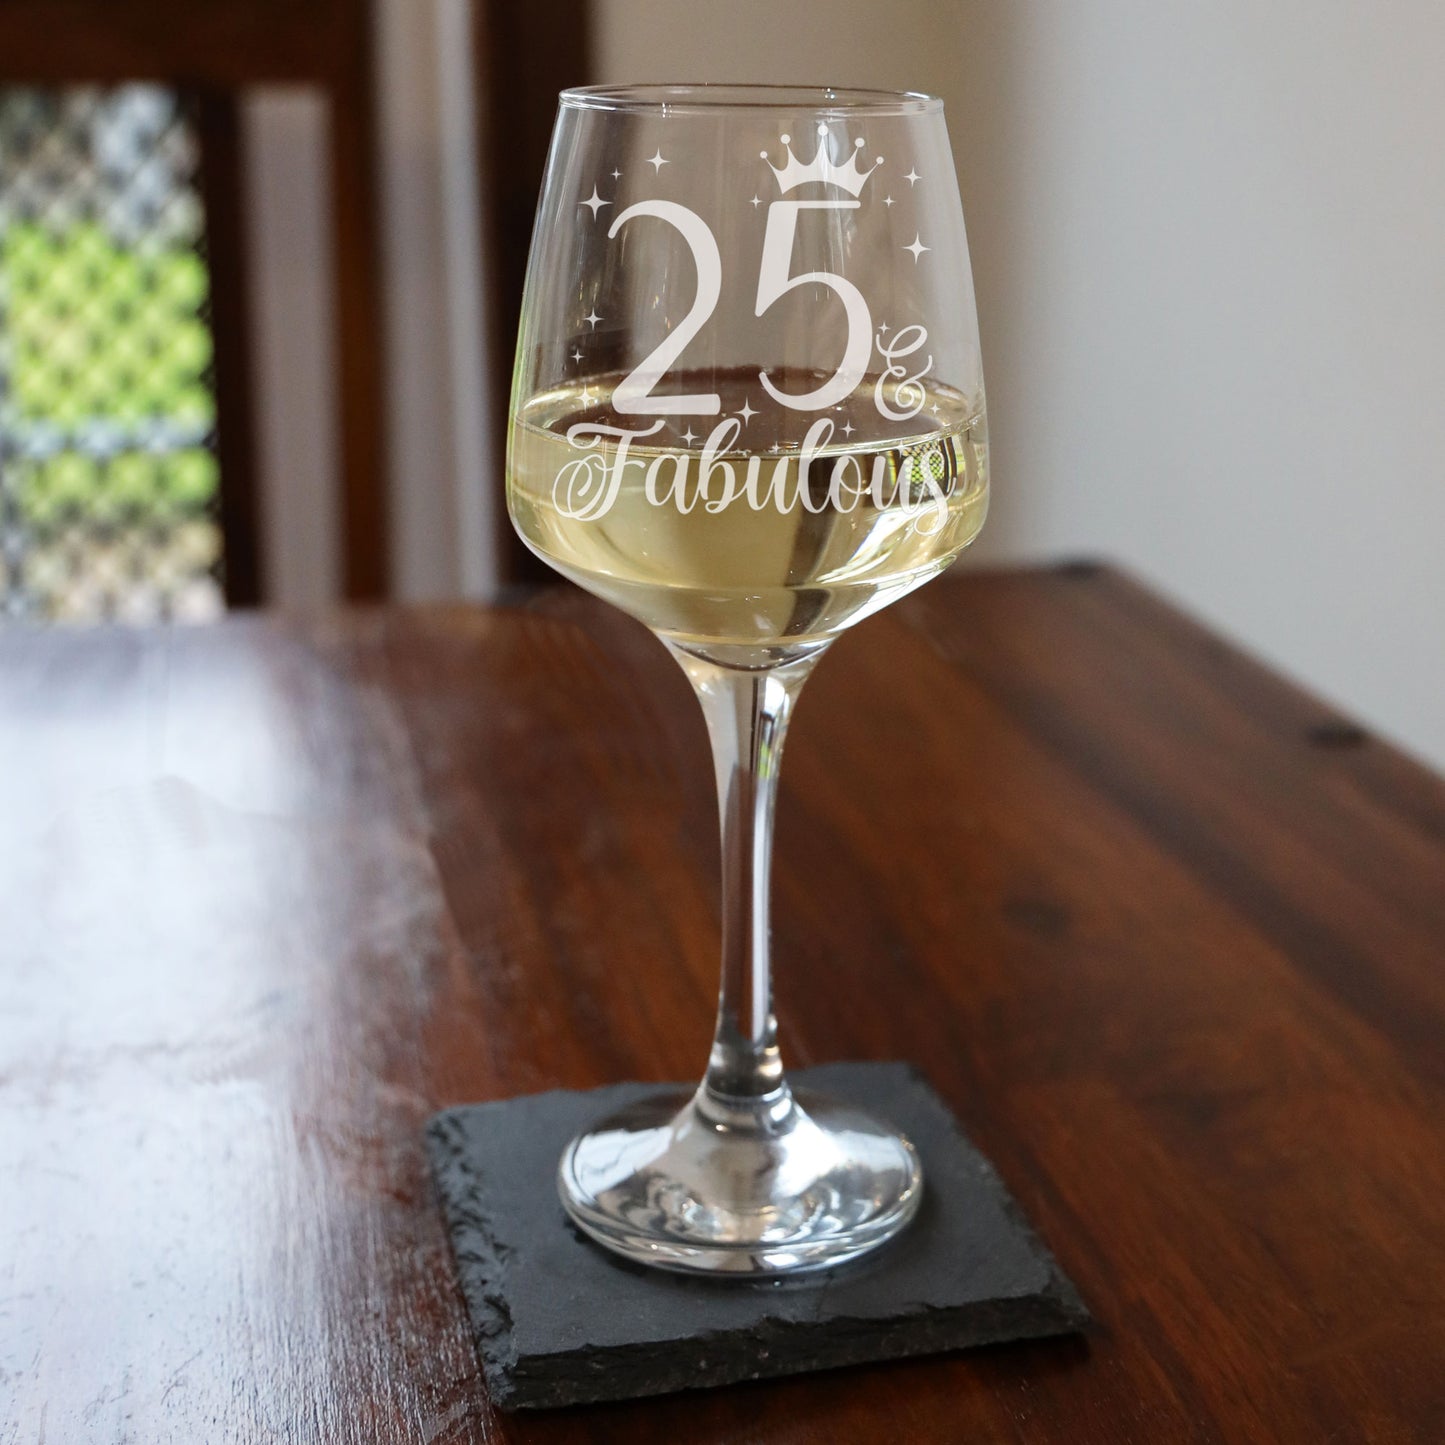 25 & Fabulous 25th Birthday Gift Engraved Wine Glass and/or Coaster Set  - Always Looking Good - Wine Glass Only  